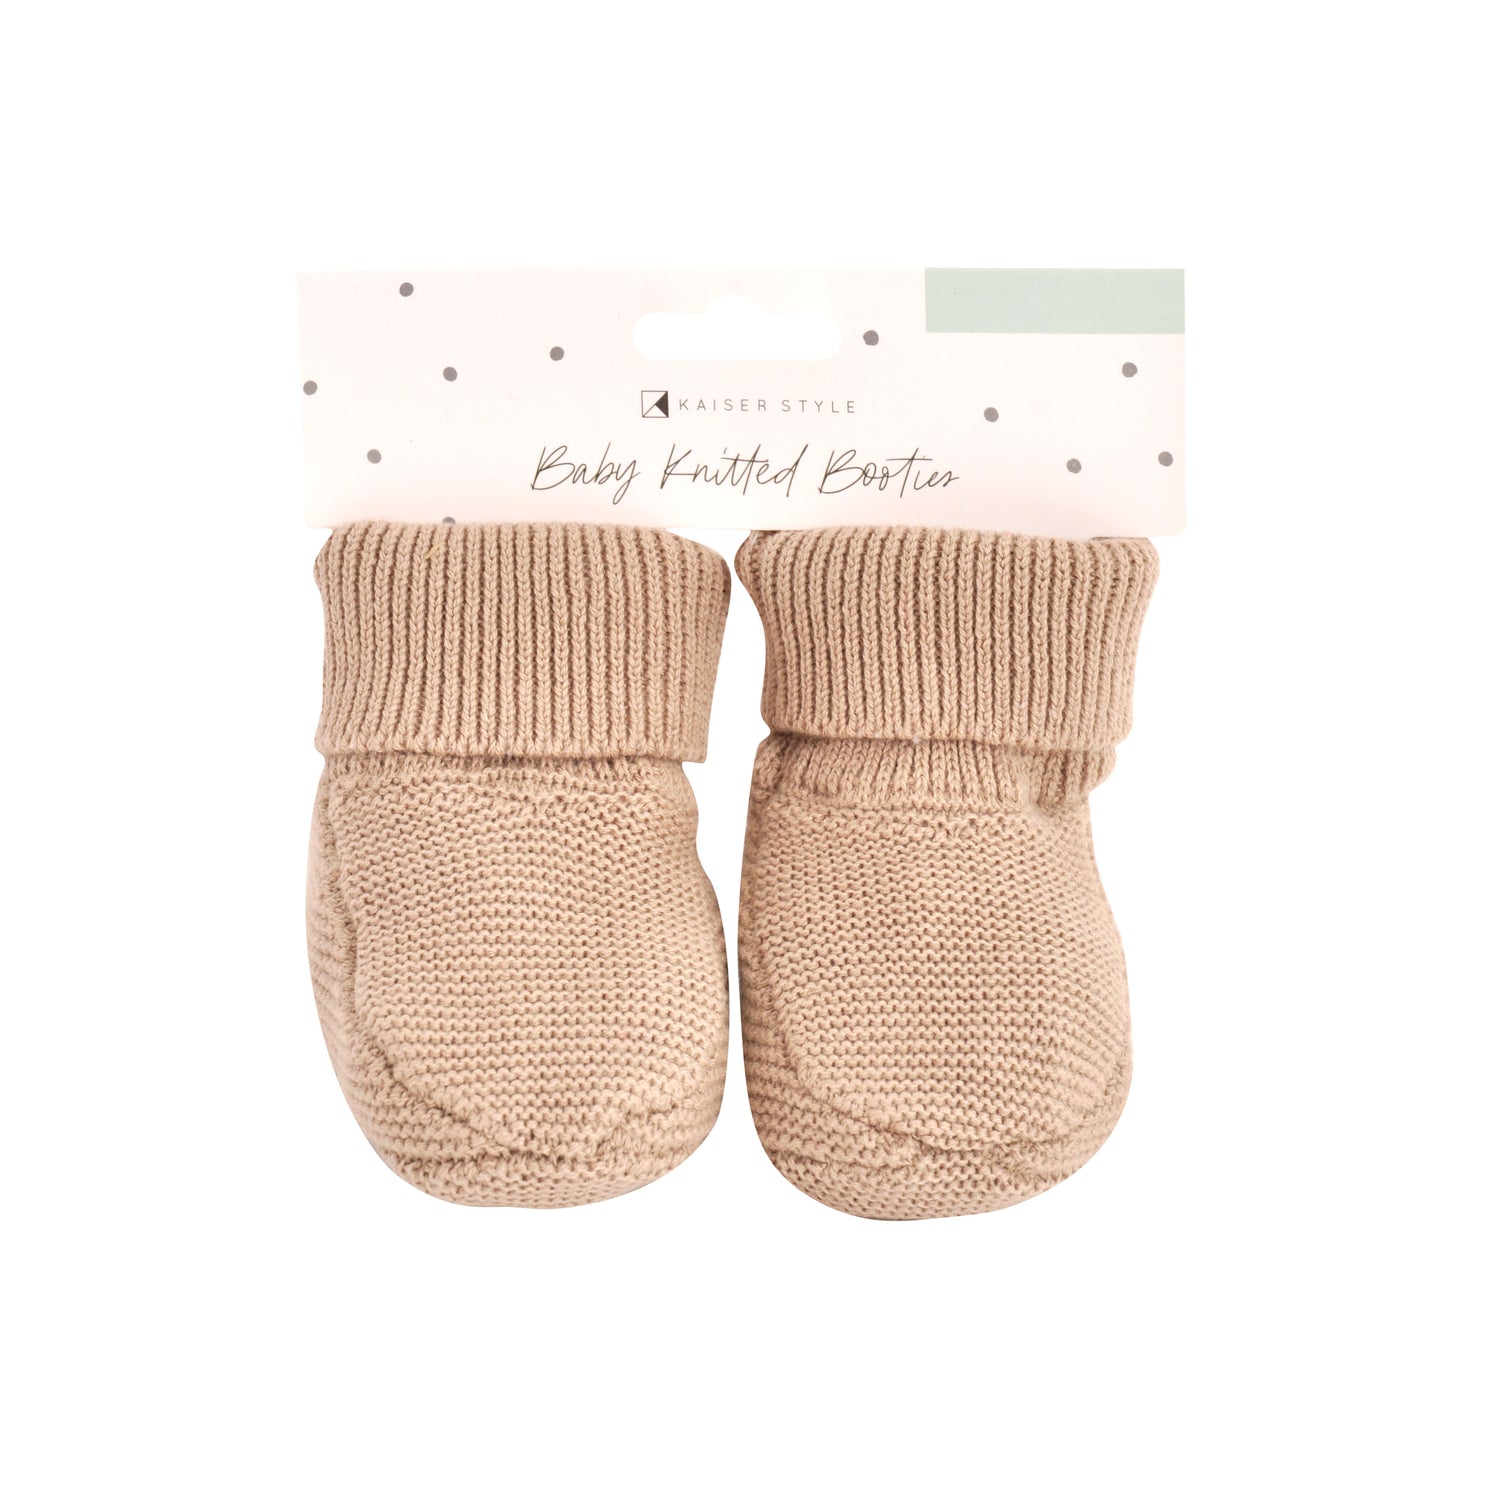 30% off selected Baby & Kids Winter Products*